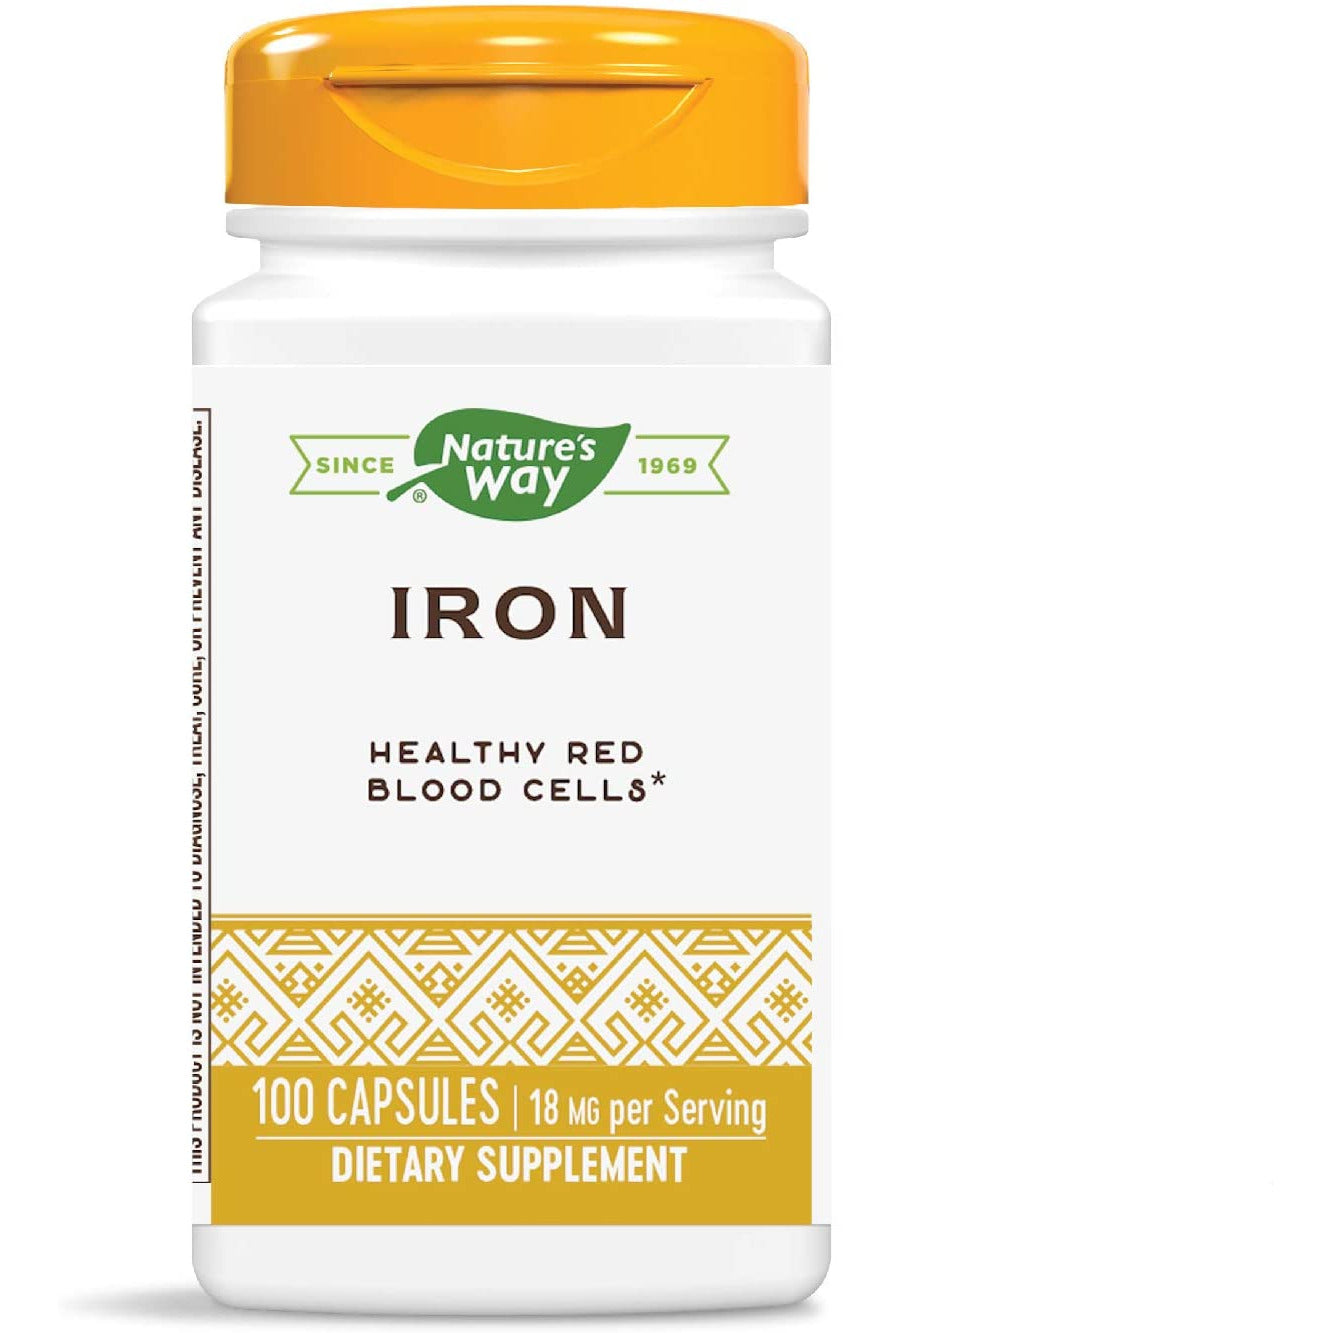 Nature's Way Iron Supports Healthy Red Blood Cells* 18mg Per Serving